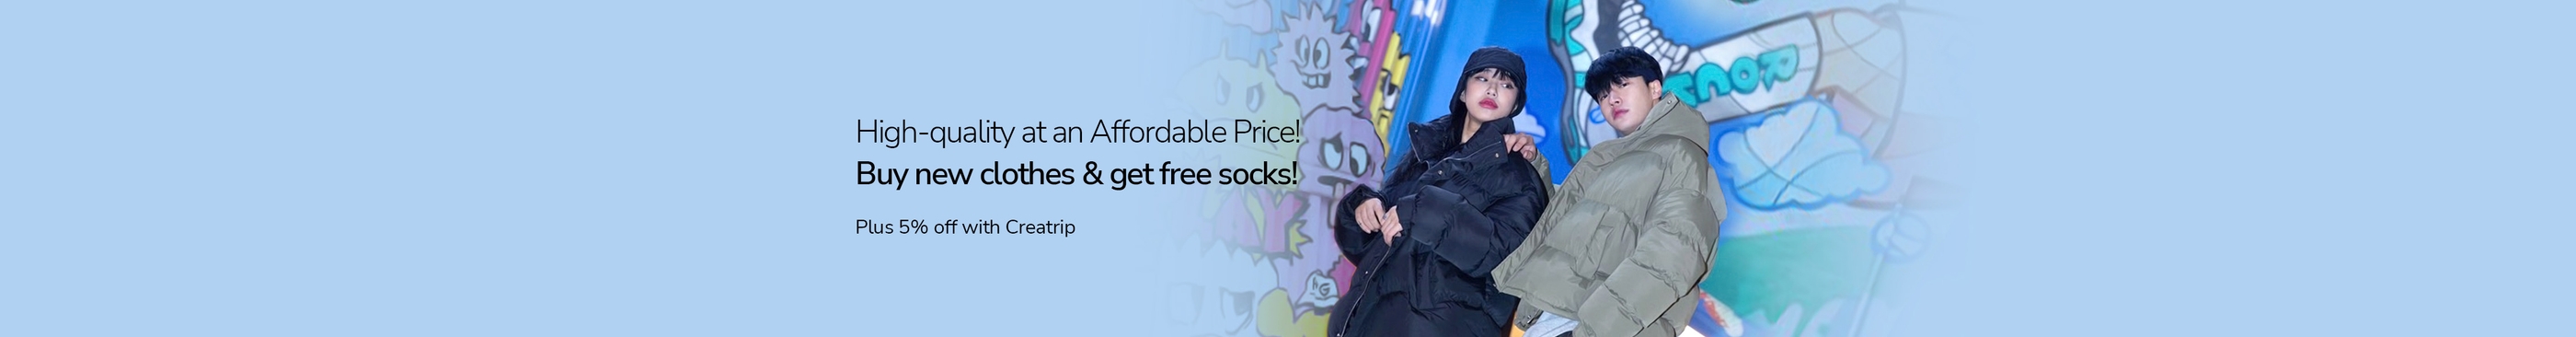 Buy new clothes & get free socks! Plus 5% off with Creatrip